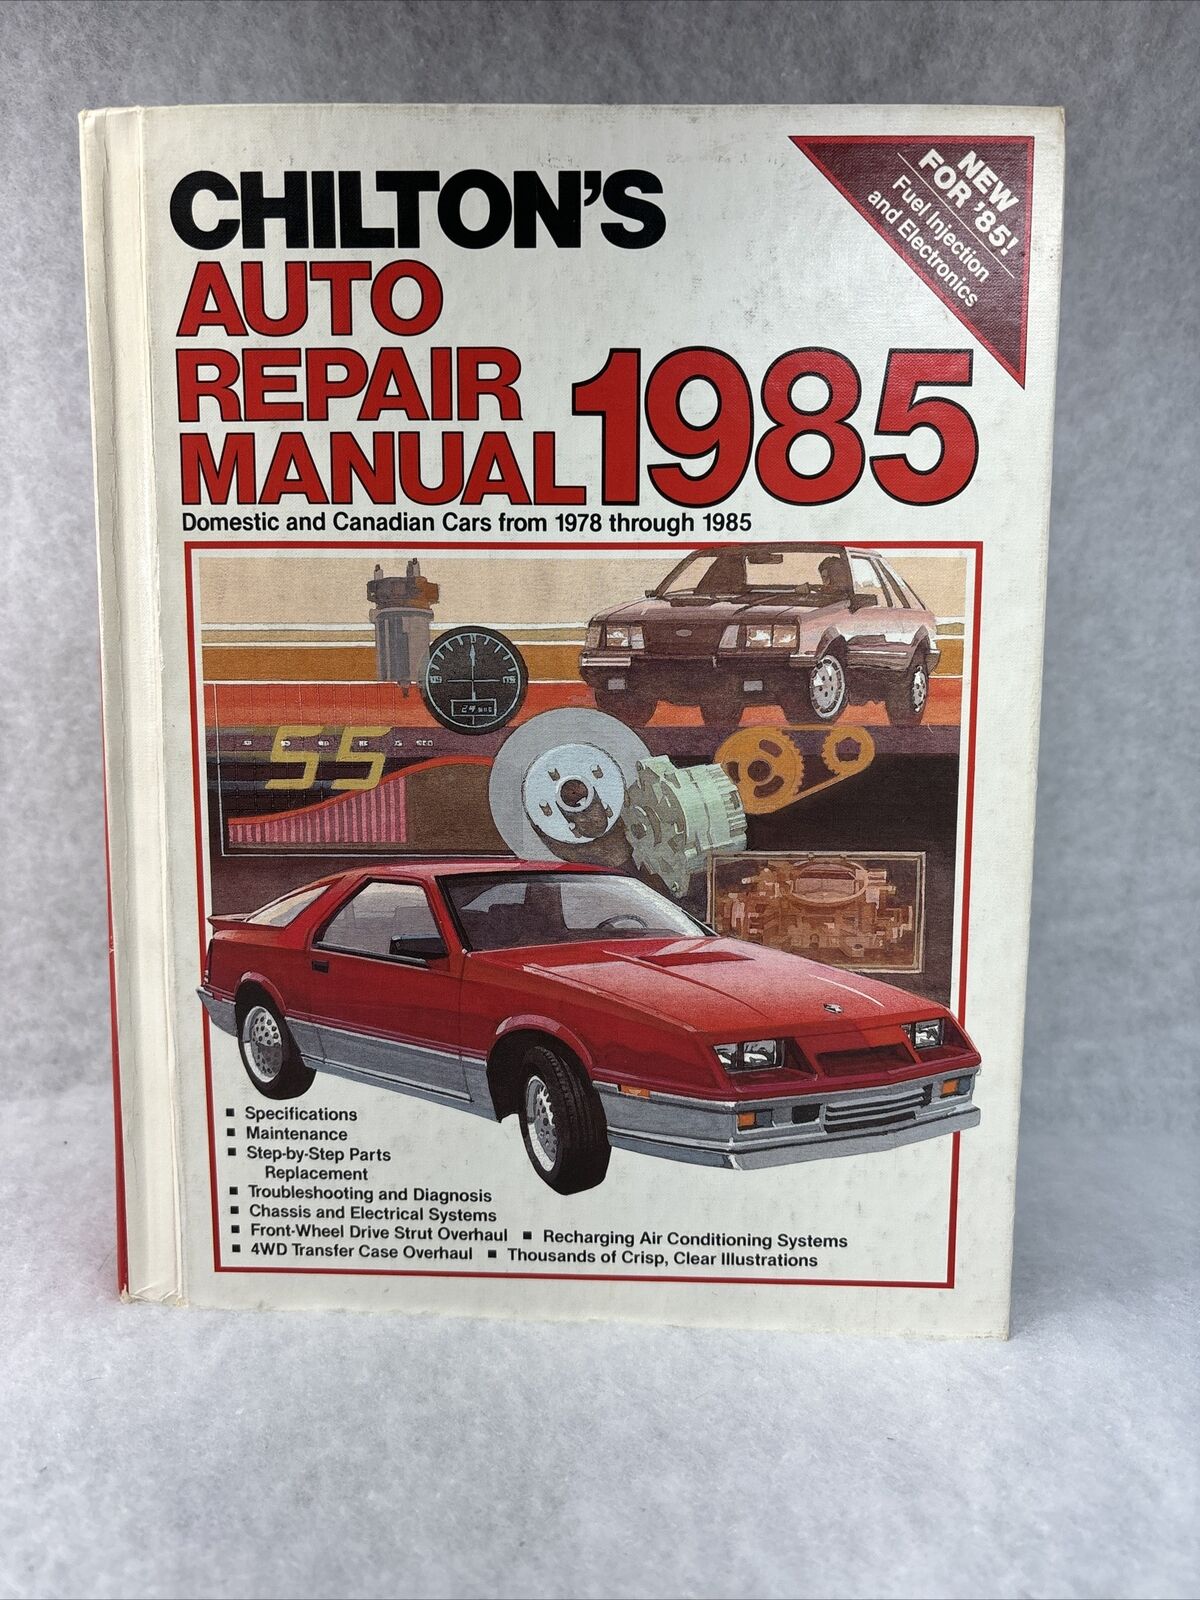 Chilton's Auto Repair Manual 1985 for Domestic & Canadian Cars 1978 to 1985